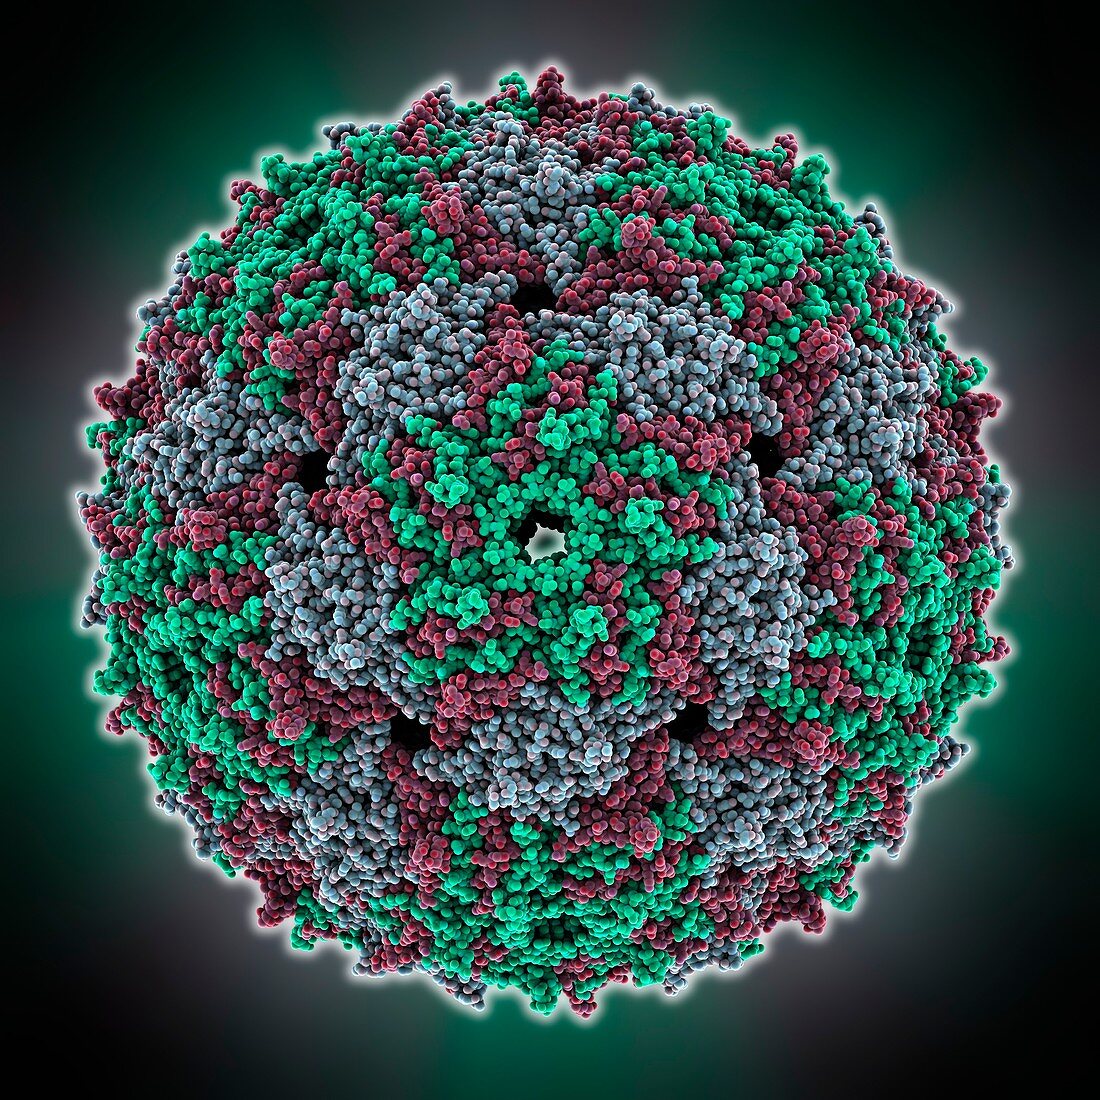 Bacteriophage MS2 capsid protein